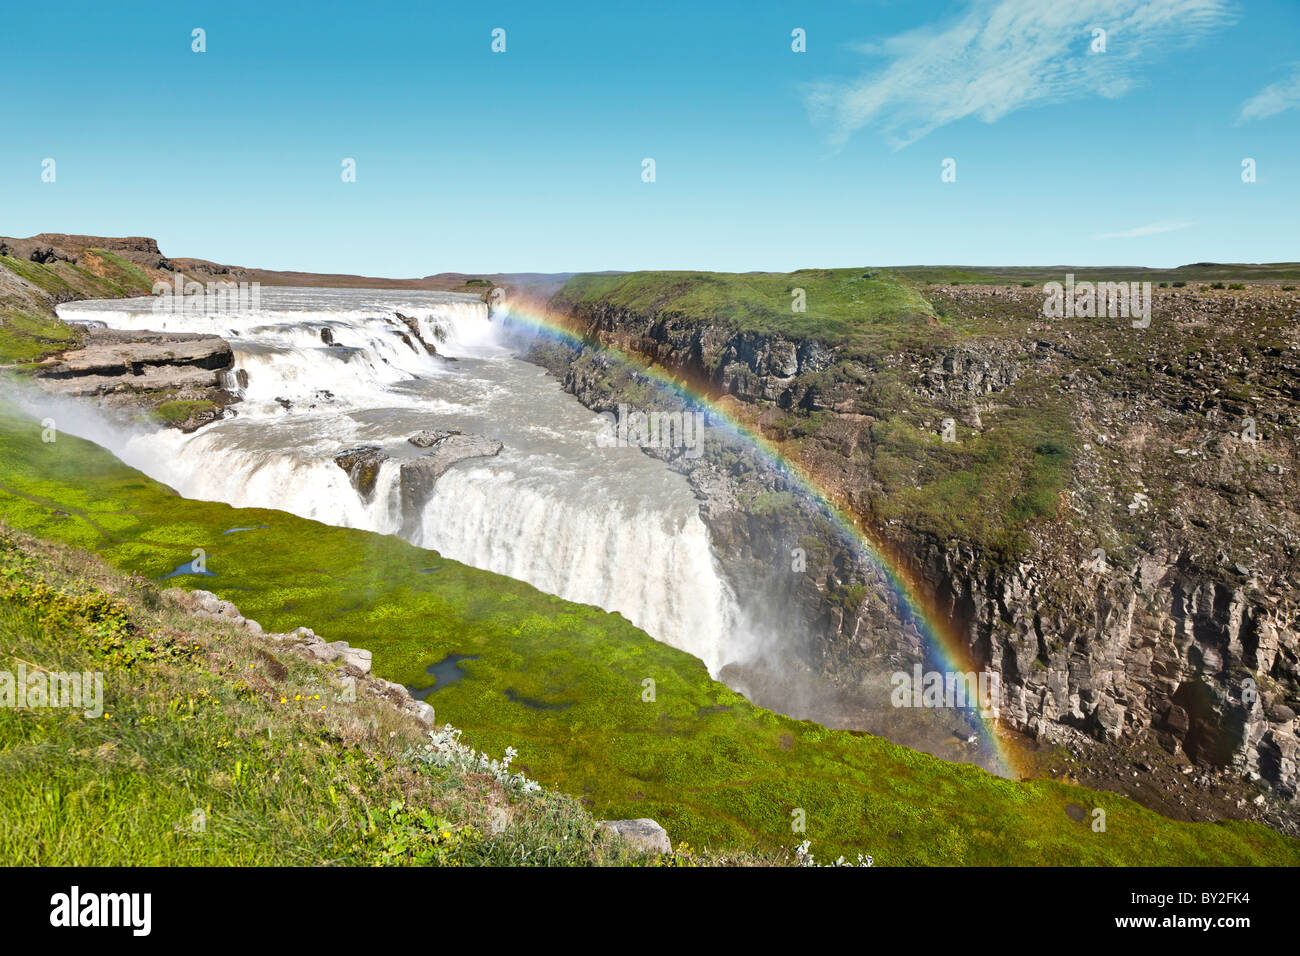 The famous Gullfoss waterfall in Iceland. Gullfoss is one of the most visited tourist attractions in Iceland. Stock Photo